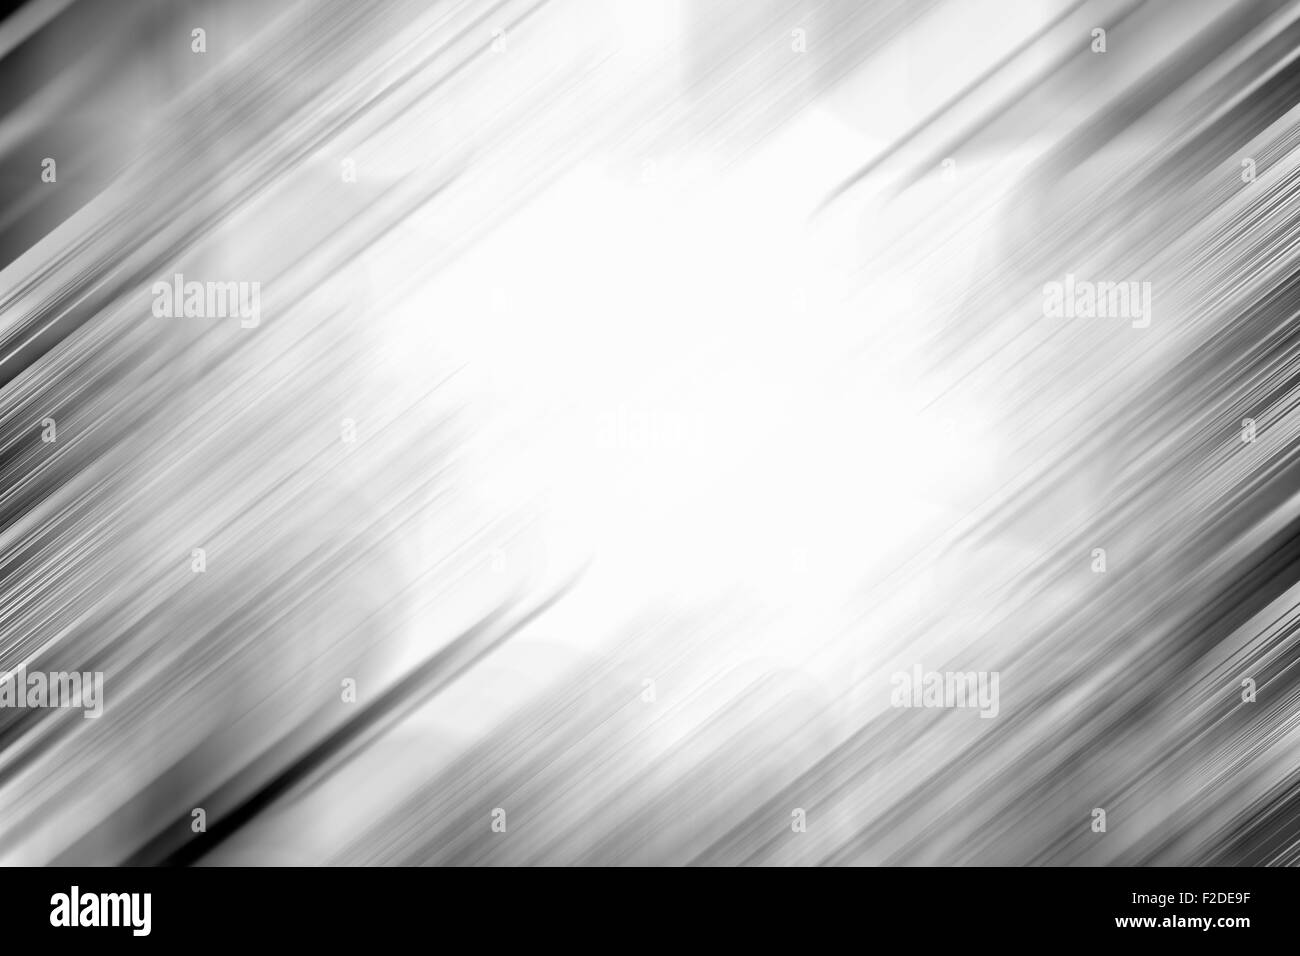 Abstract diagonal blurred motion black and white background design Stock Photo